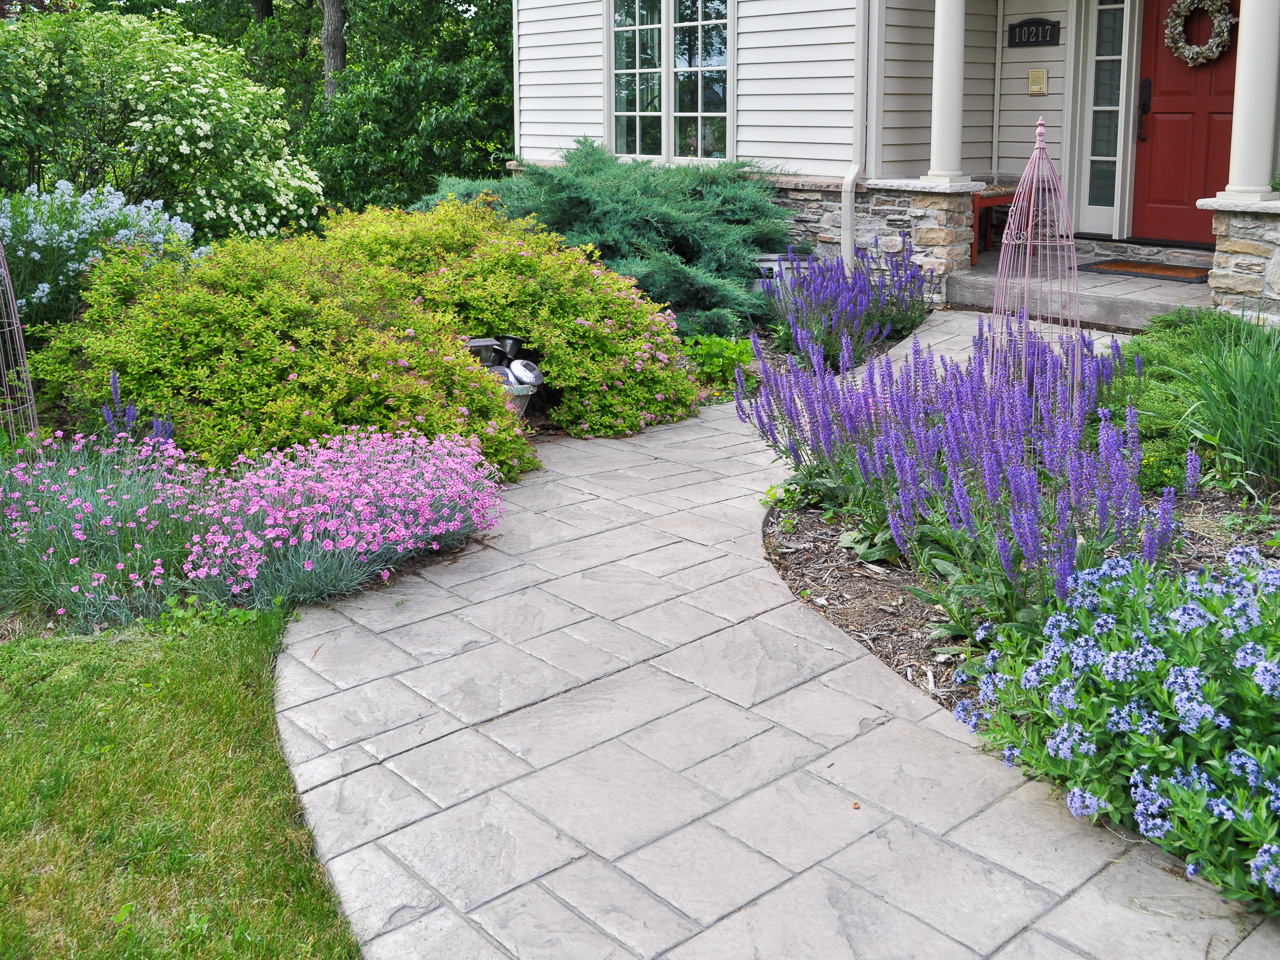 Home entry walk leading to front porch through colorful plantings